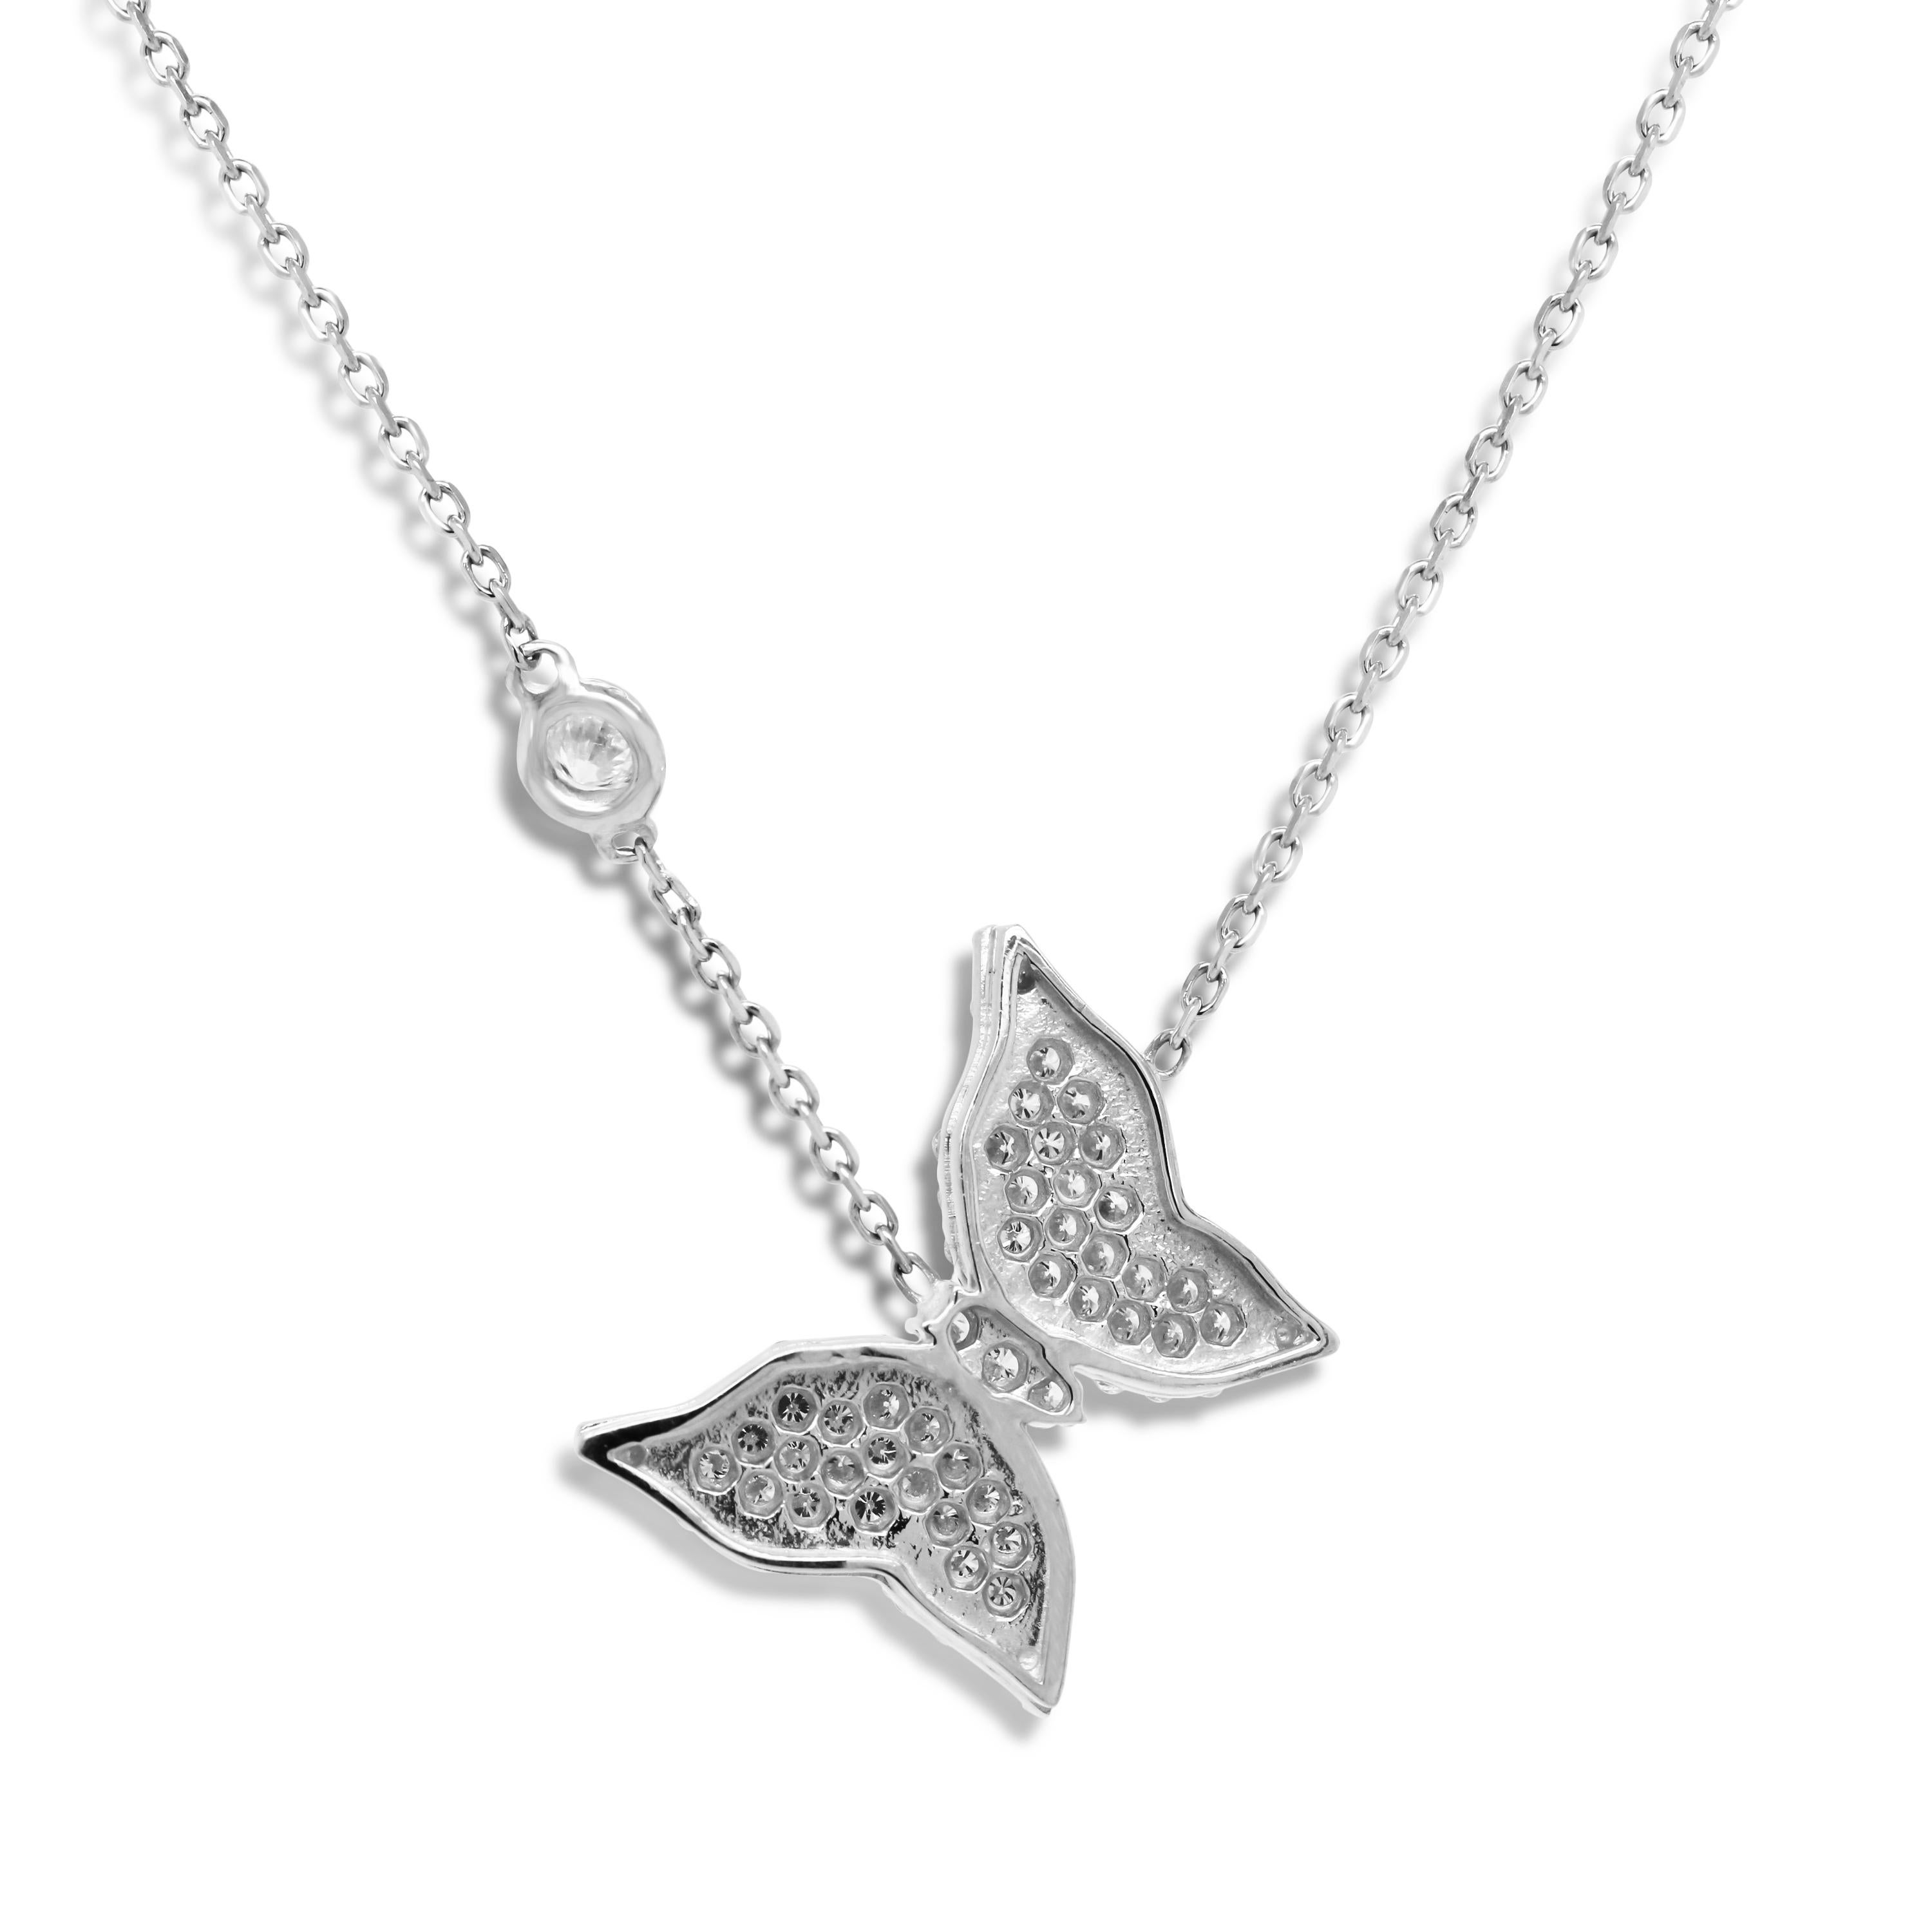 Stambolian 18 Karat White Gold Diamond Small Butterfly Pendant Necklace

The 2021 Spring Butterfly by Stambolian, this is the smaller version hand made in solid 18k white gold. Diamonds are pavé set on the butterfly and the chain also has one